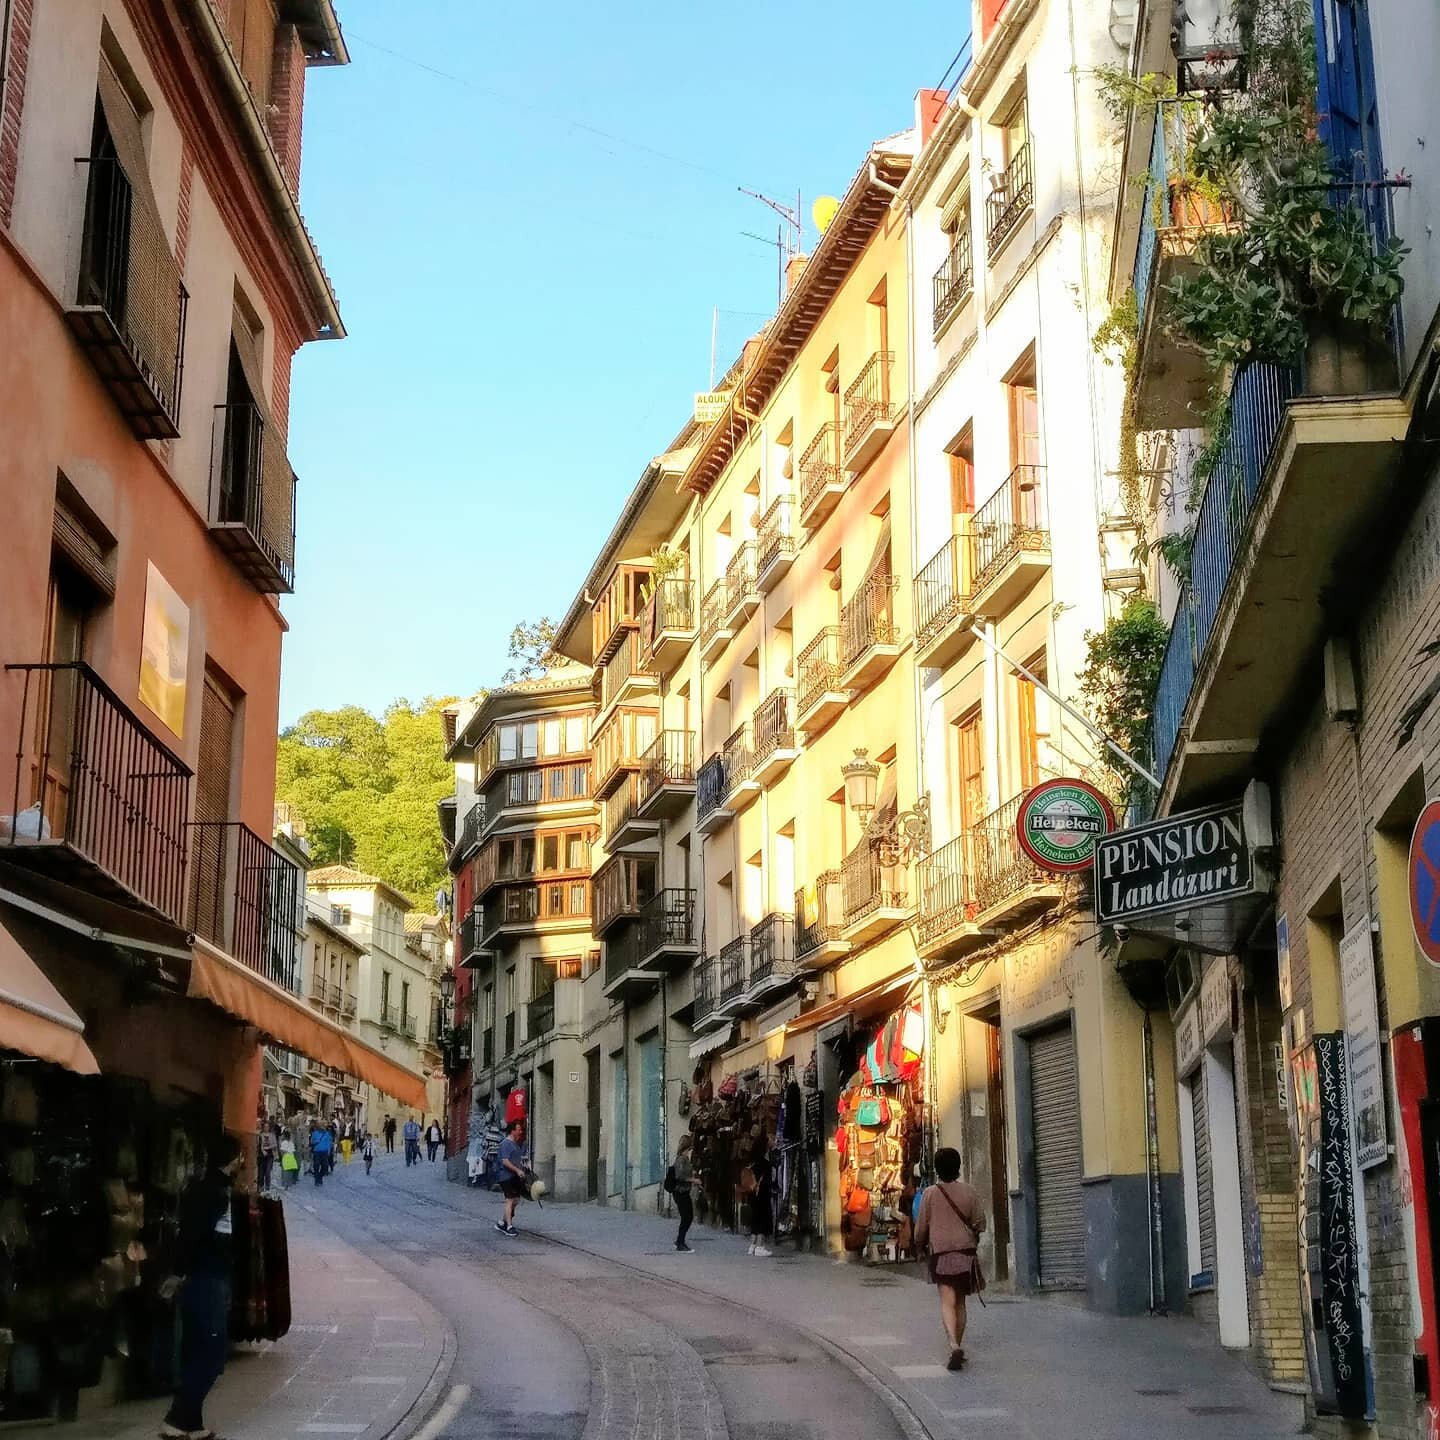 #granada is a hilly city with winding roads. The typical layout of the city has 4 to 5 story #buildings that have shops on the road level and apartments above. This method of #urbanplanning allows for a more #walkablecity and good use of space. This 